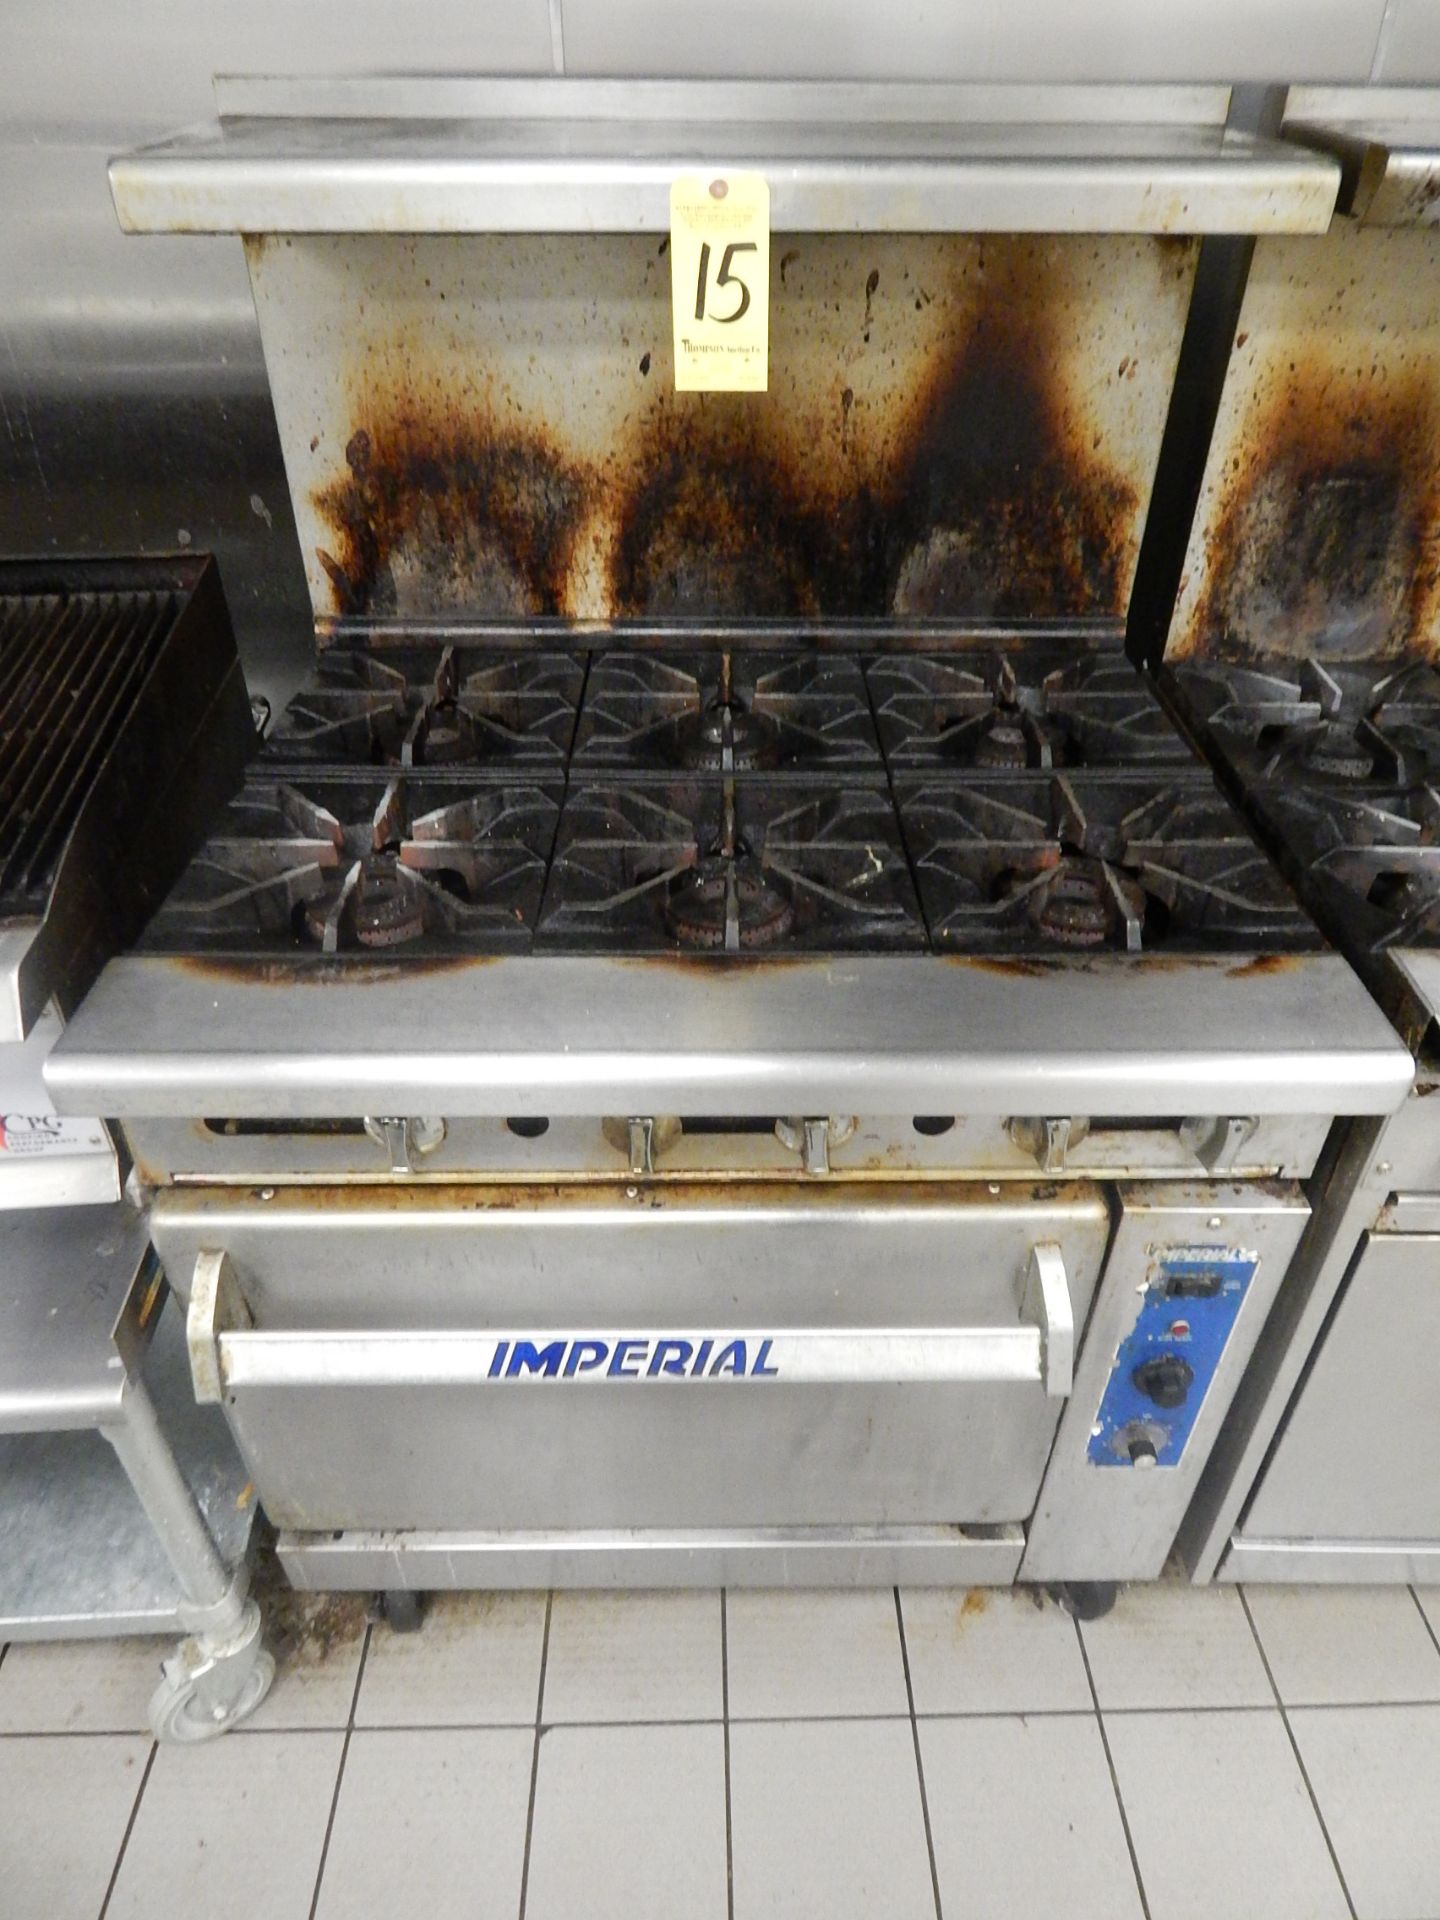 Imperial 6-Burner Gas Range with Oven